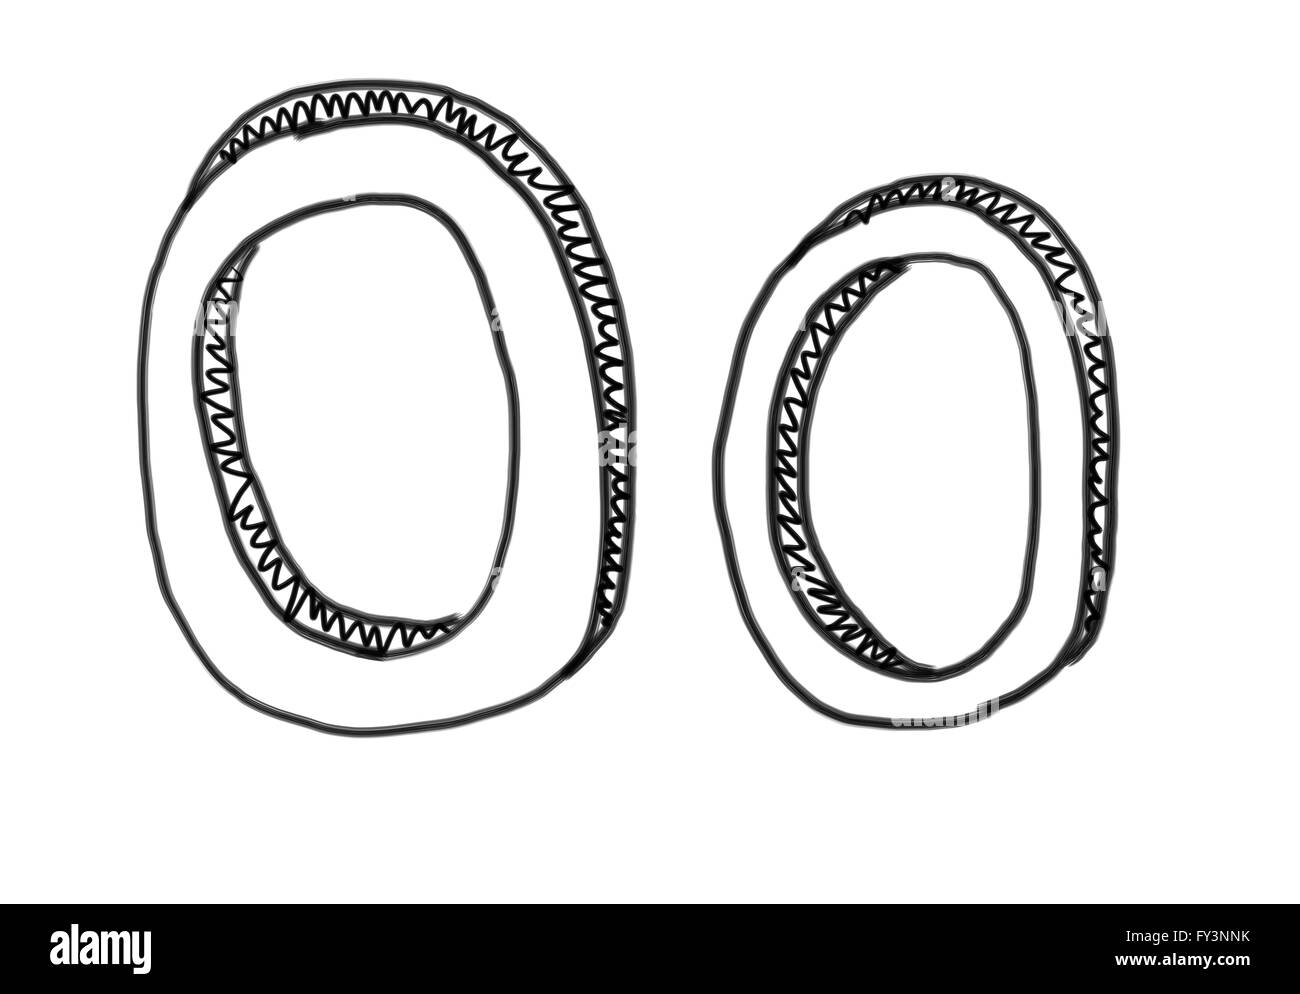 New drawing Character O of alphabet logo icon in design elements. Stock Photo